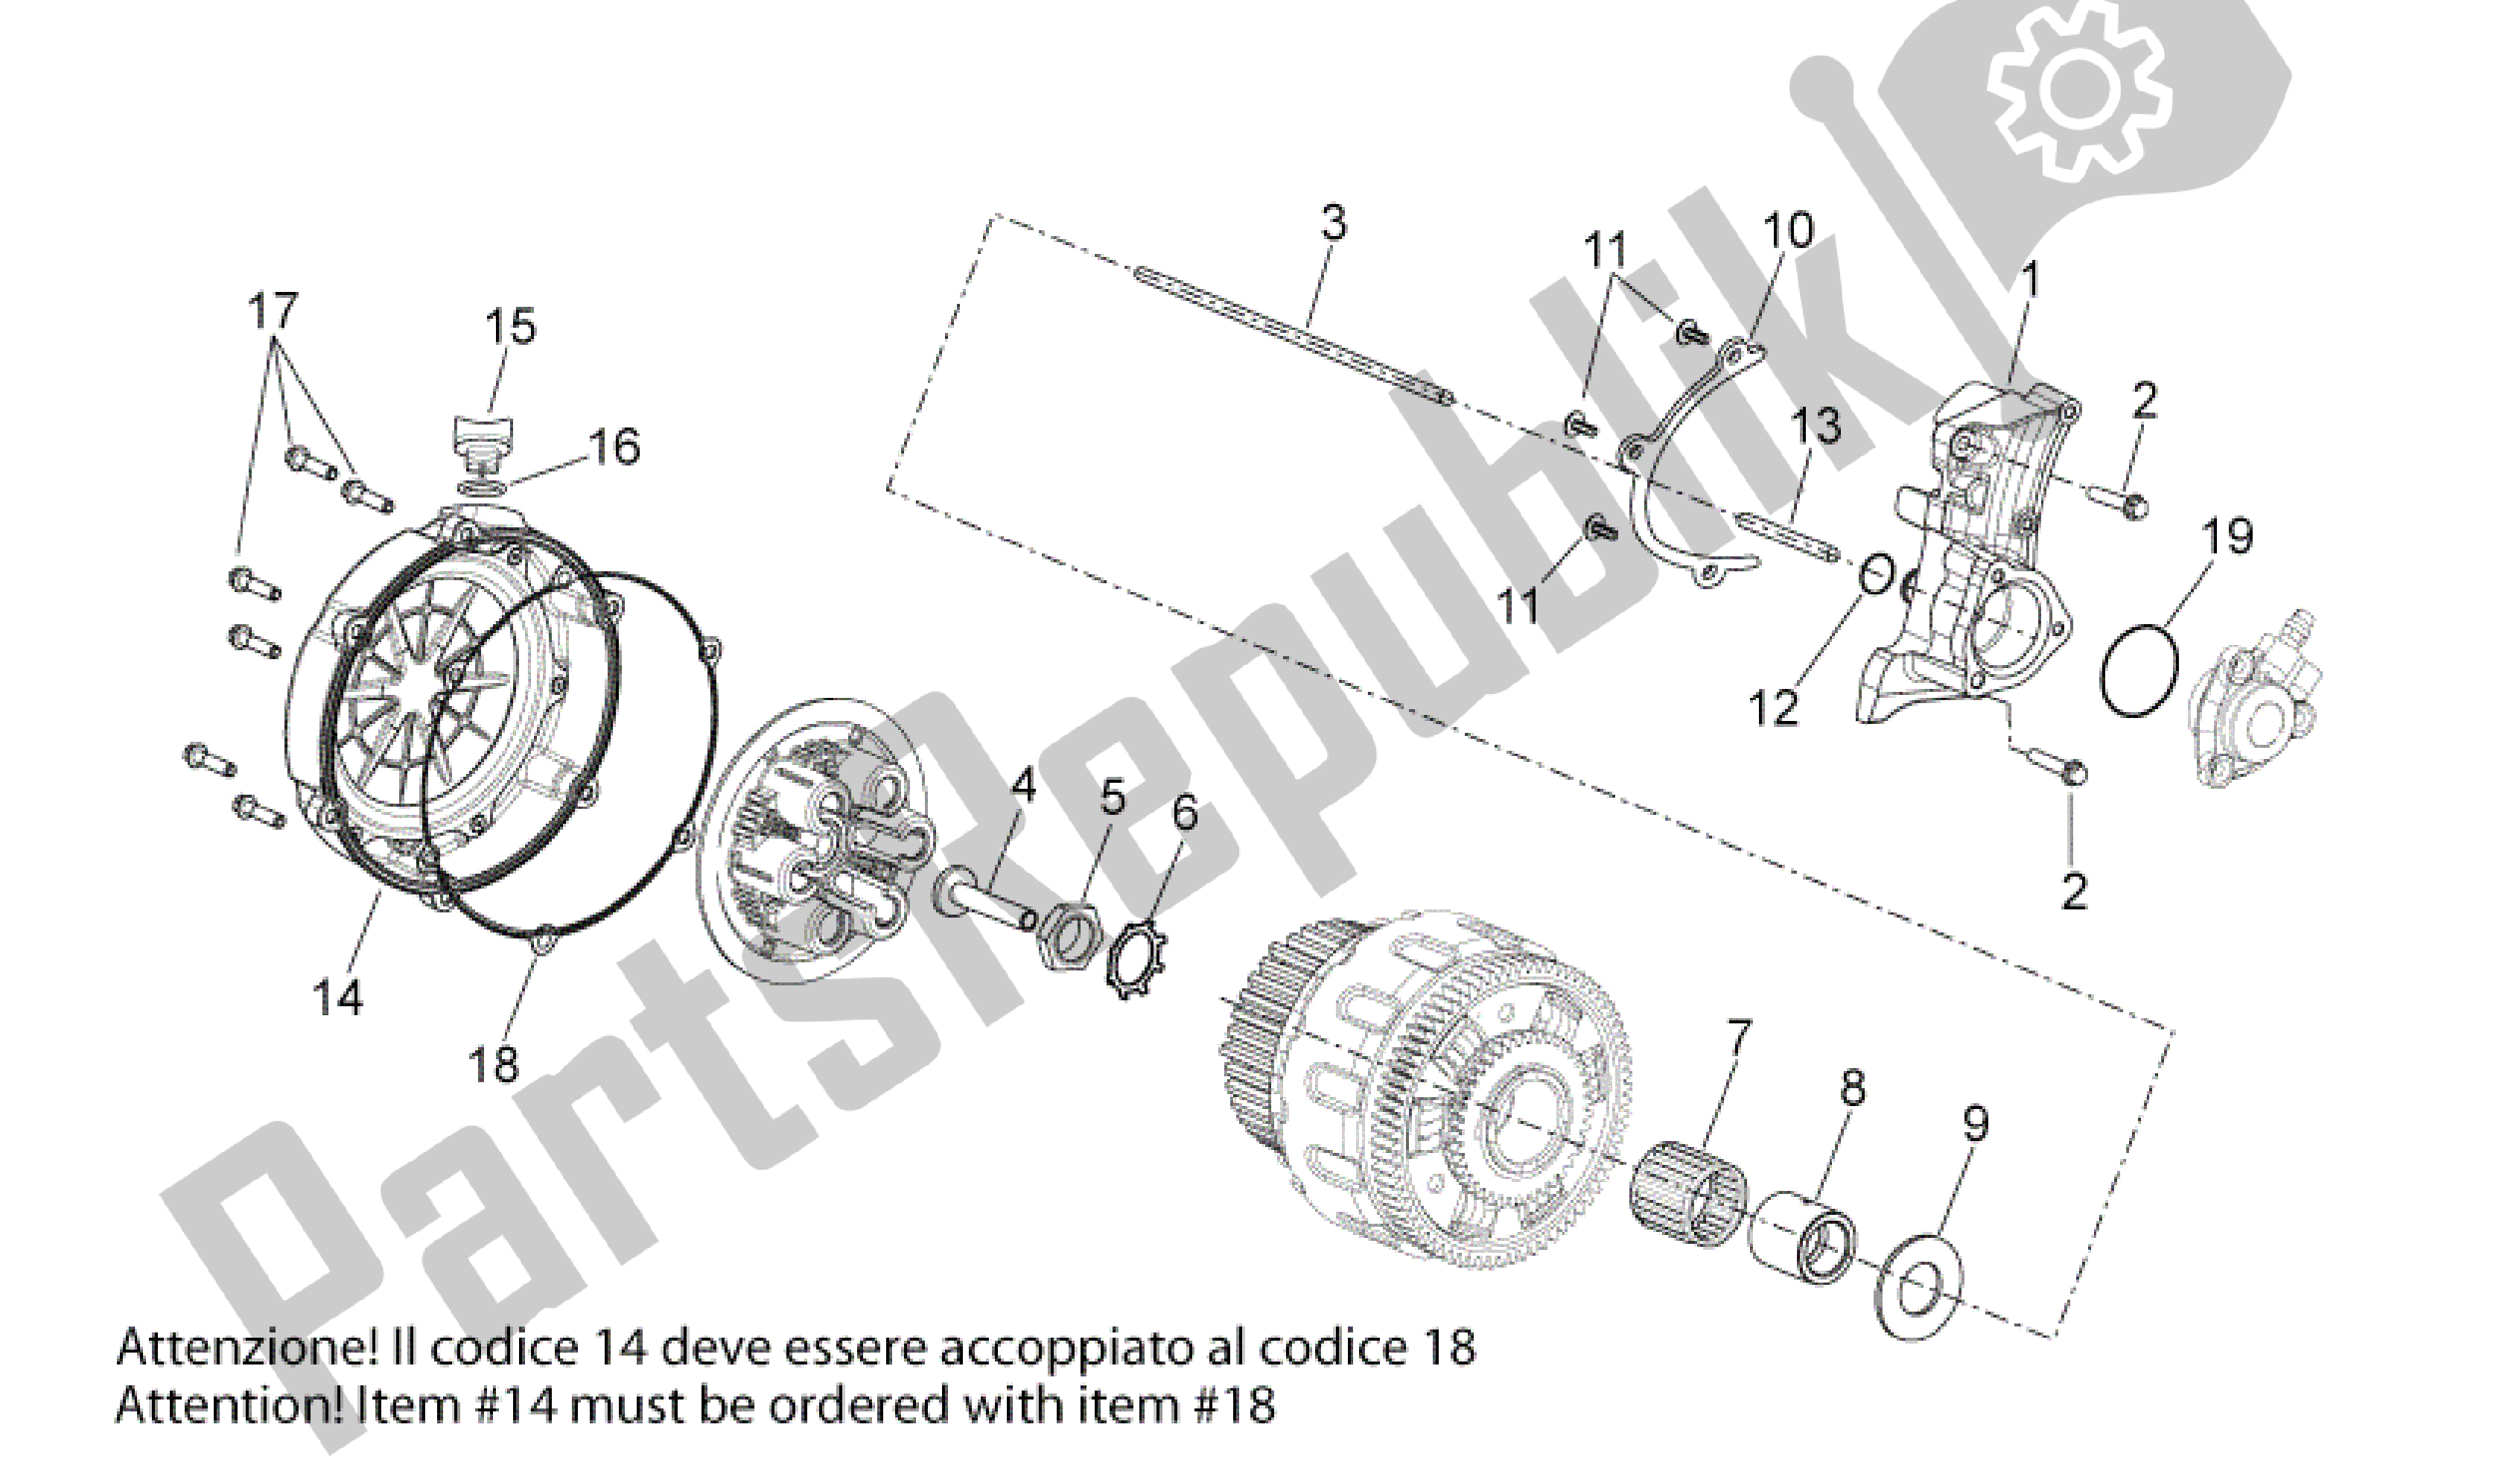 All parts for the Clutch I of the Aprilia Shiver 750 2011 - 2013